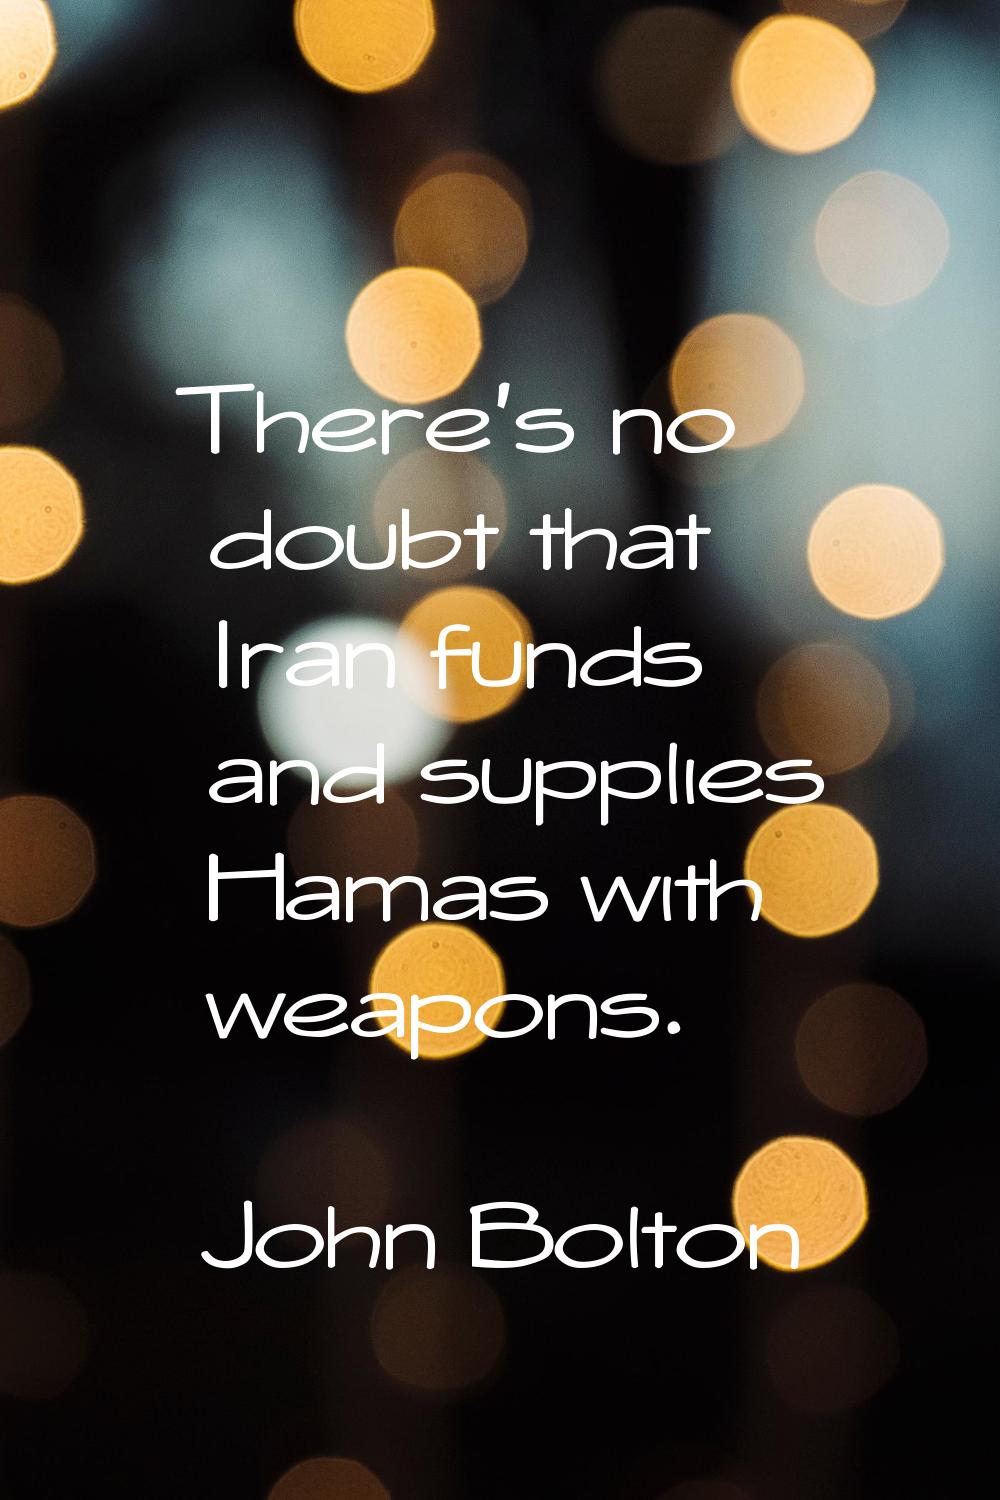 There's no doubt that Iran funds and supplies Hamas with weapons.